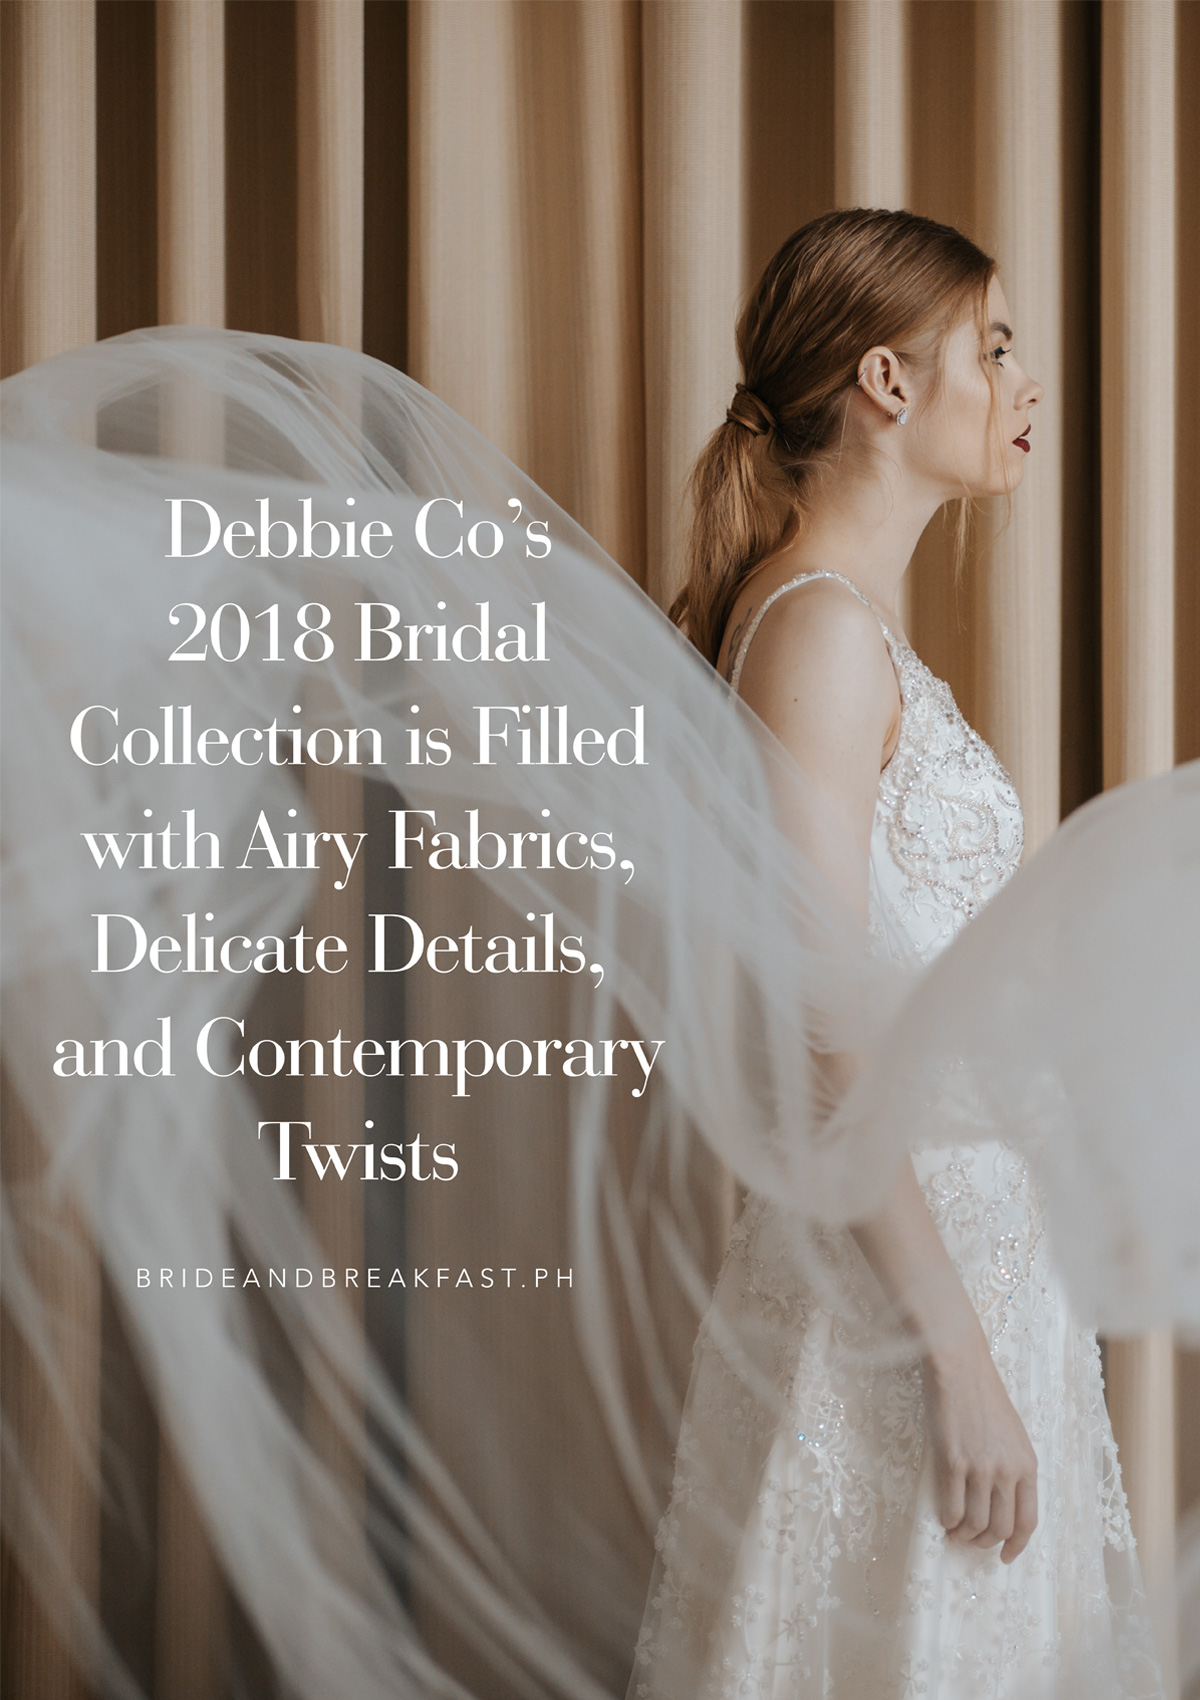 Debbie Co's 2018 Bridal Collection is Filled with Airy Fabrics, Delicate Details, and Contemporary Twists